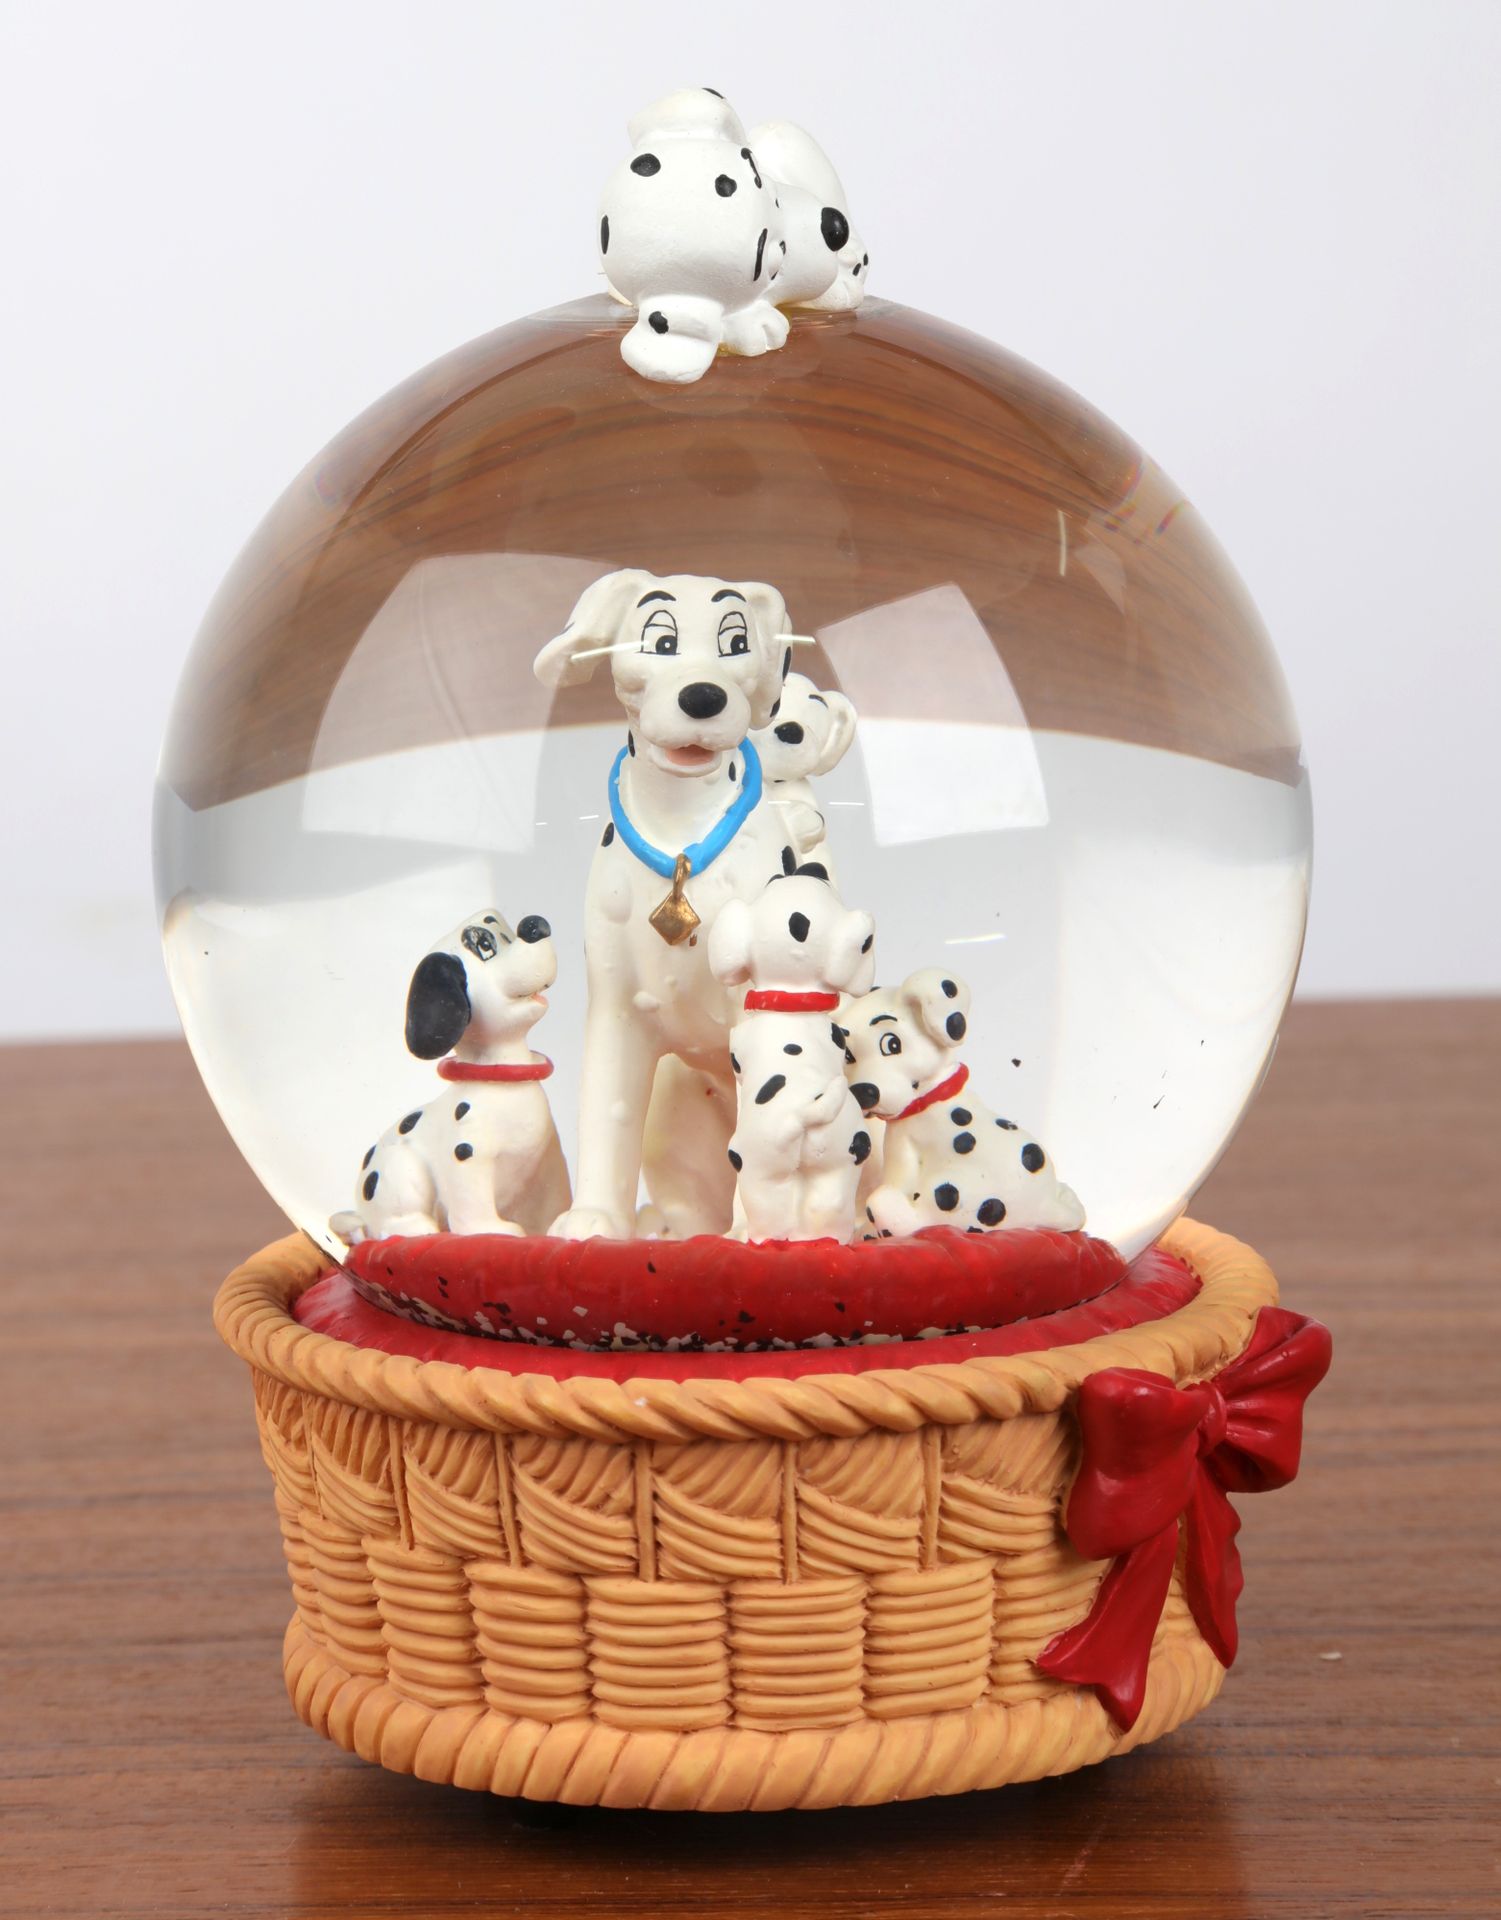 Null "Christmas ball", and music box with "101 dalmatians" decoration. 16x12cm.